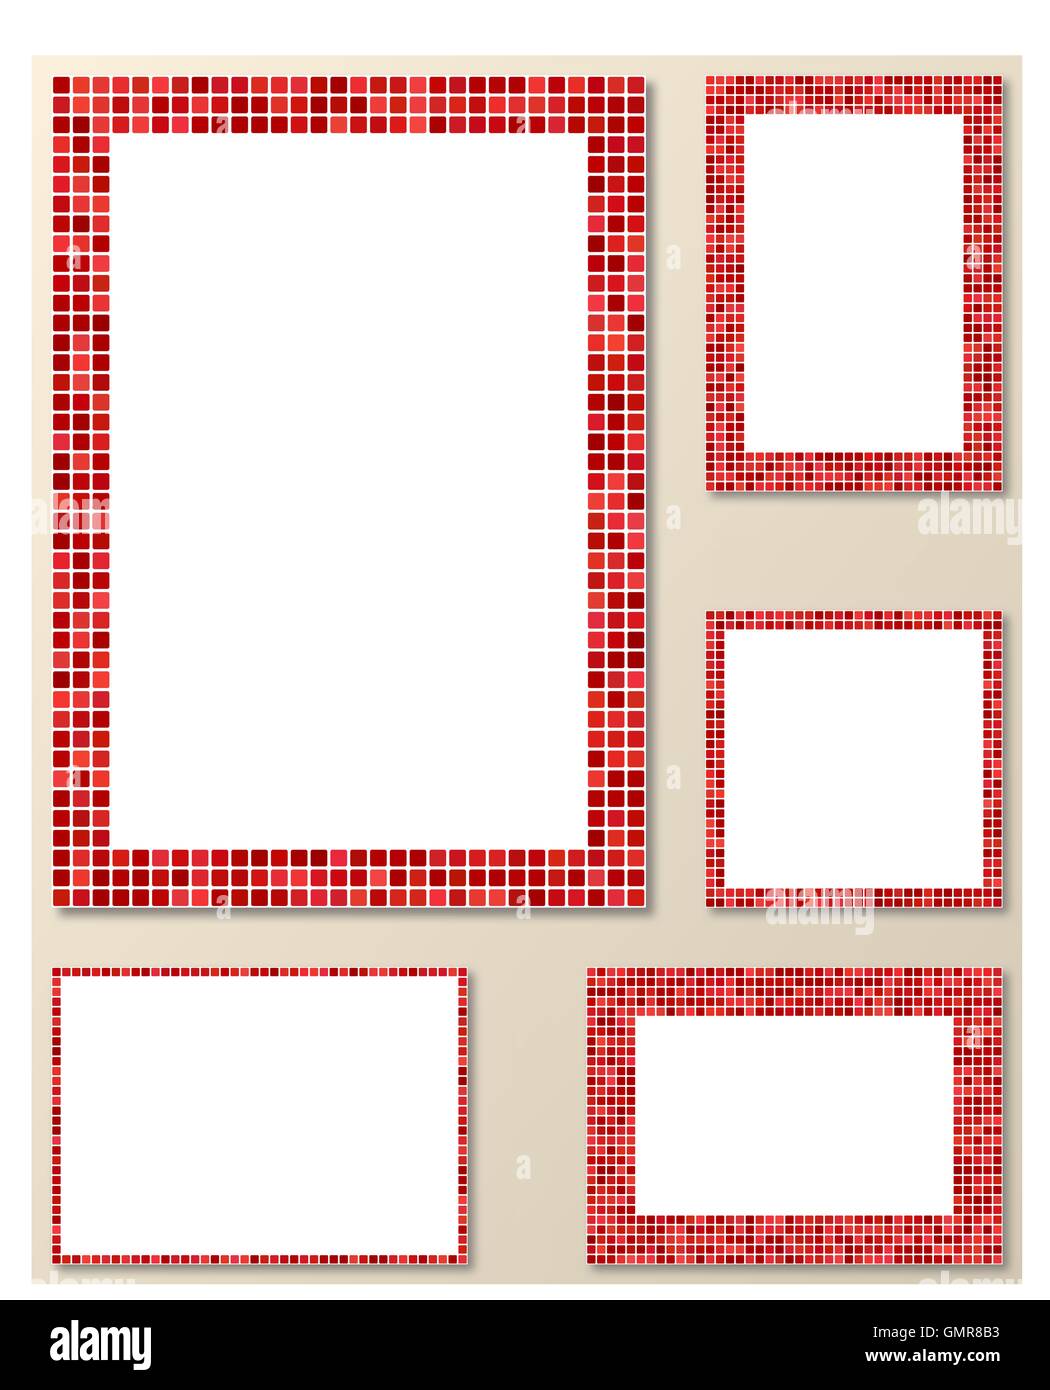 Red pixel mosaic page border template set Stock Vector